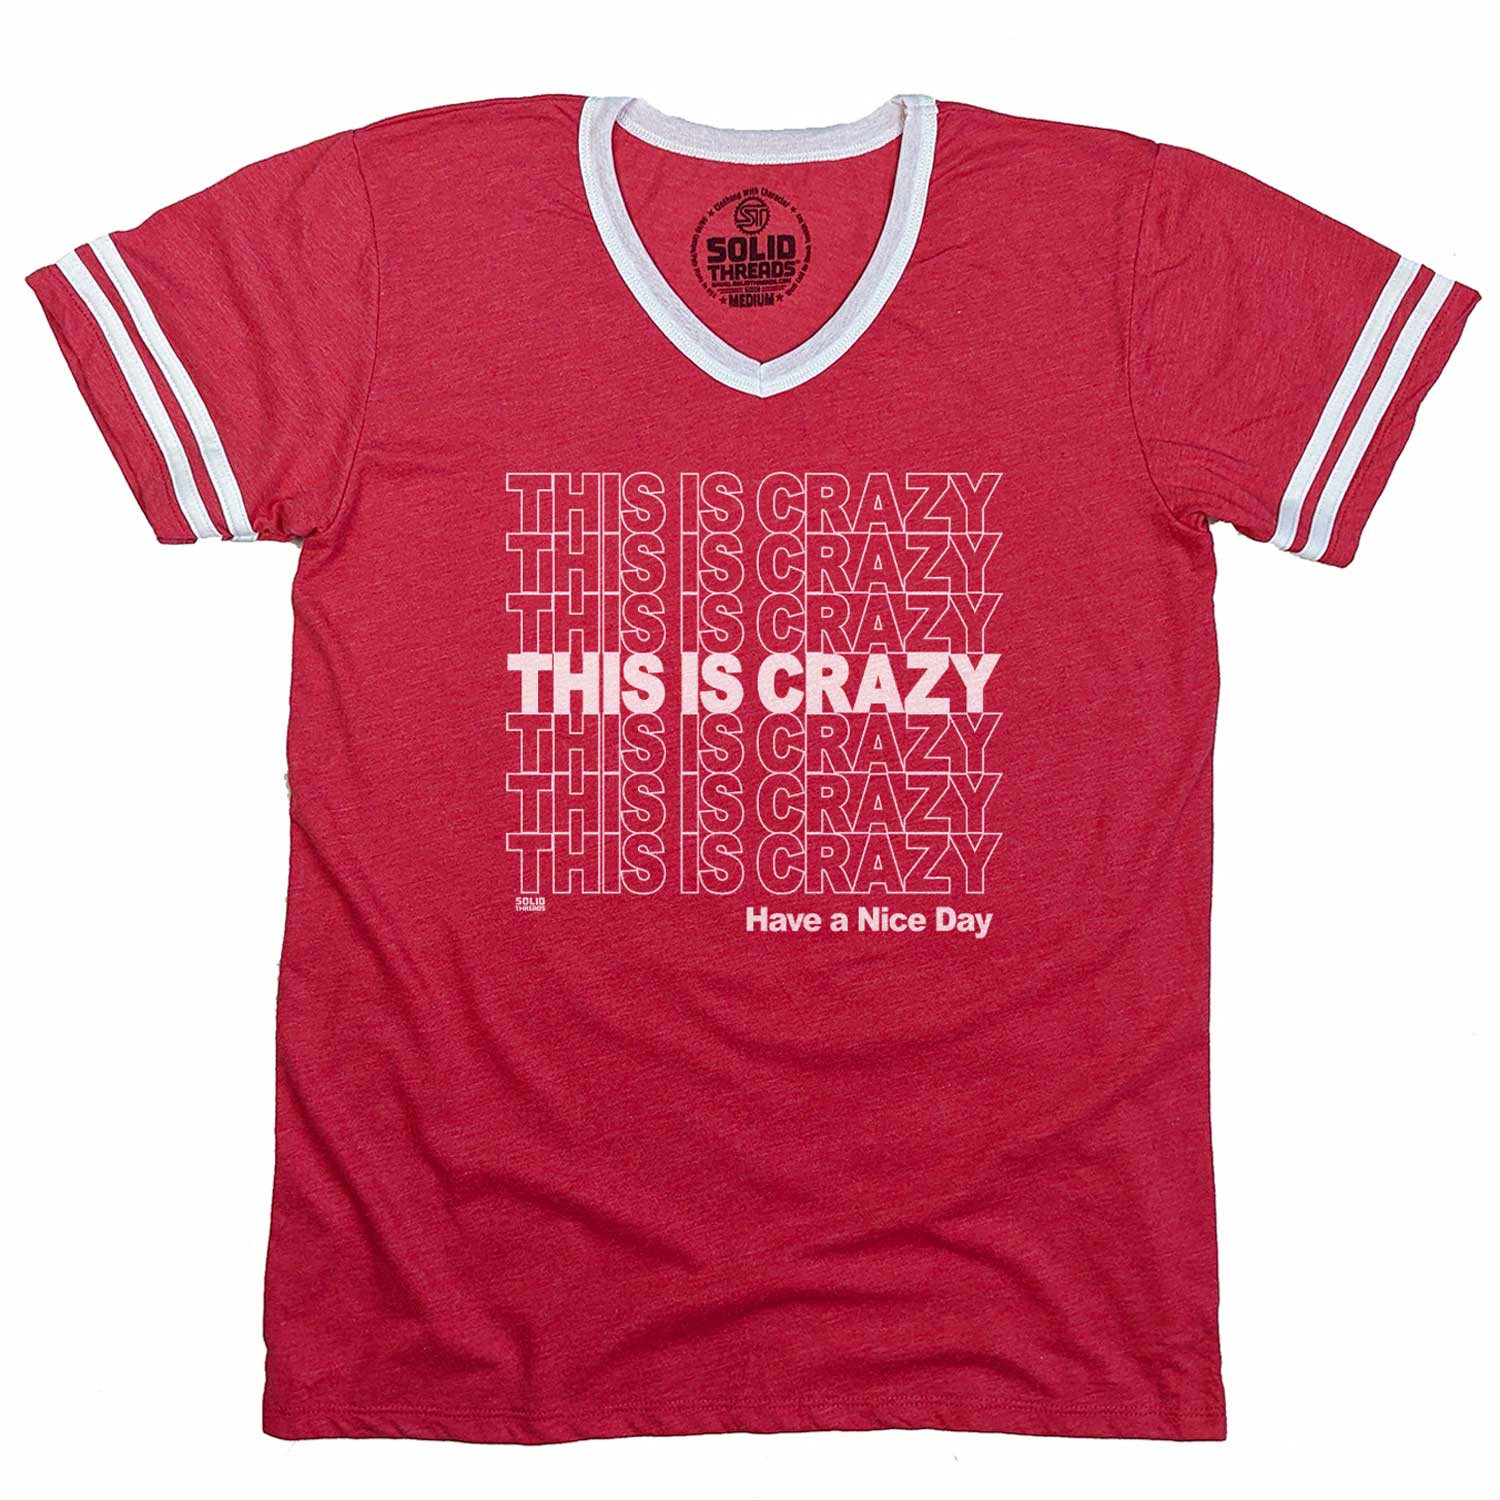 Men's This is Crazy Vintage Graphic V-Neck Tee | Funny National Lampoon's T-Shirt | Solid Threads